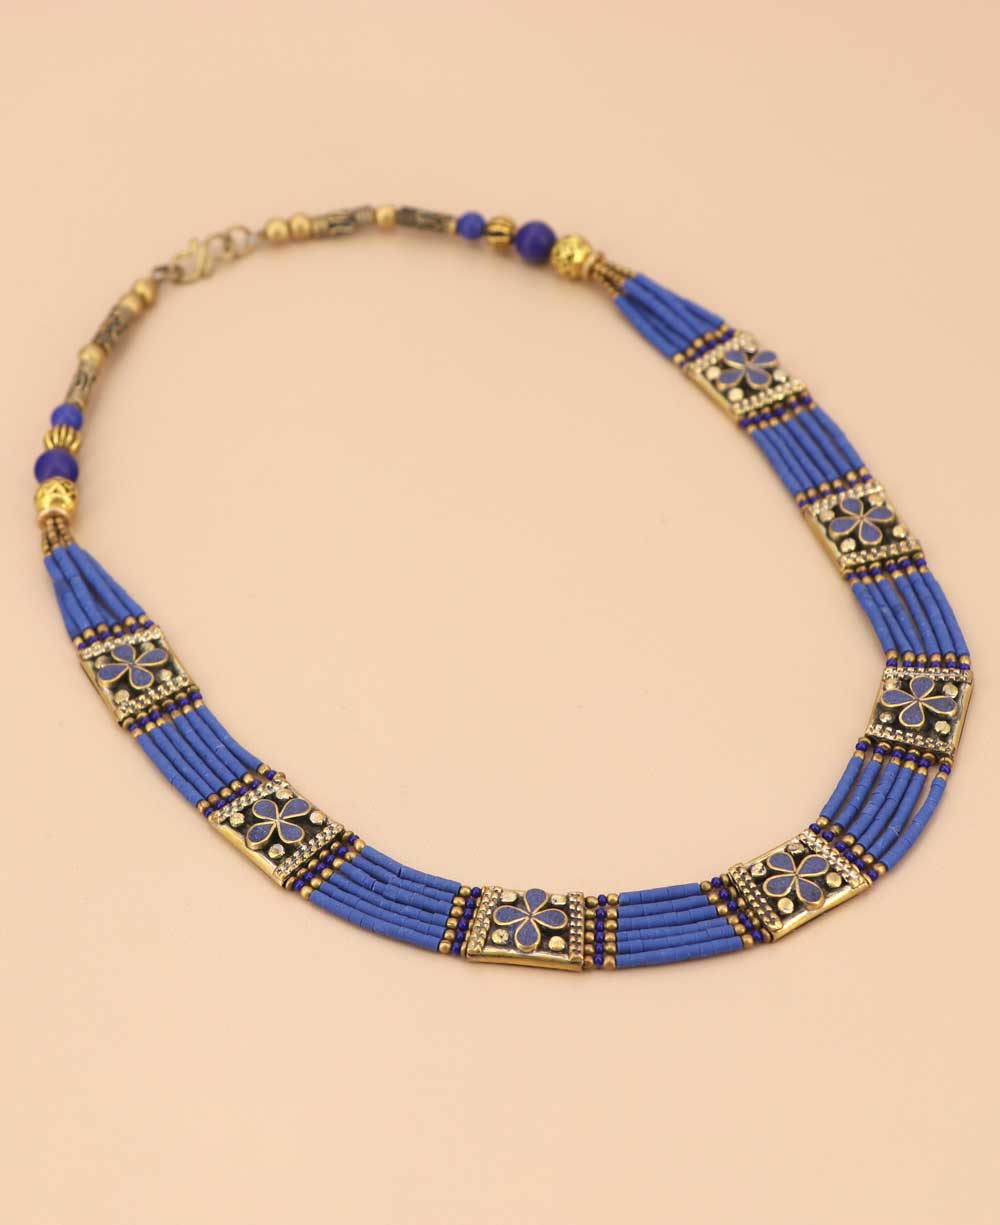 Ethnic Tibetan necklace with blue clay beads